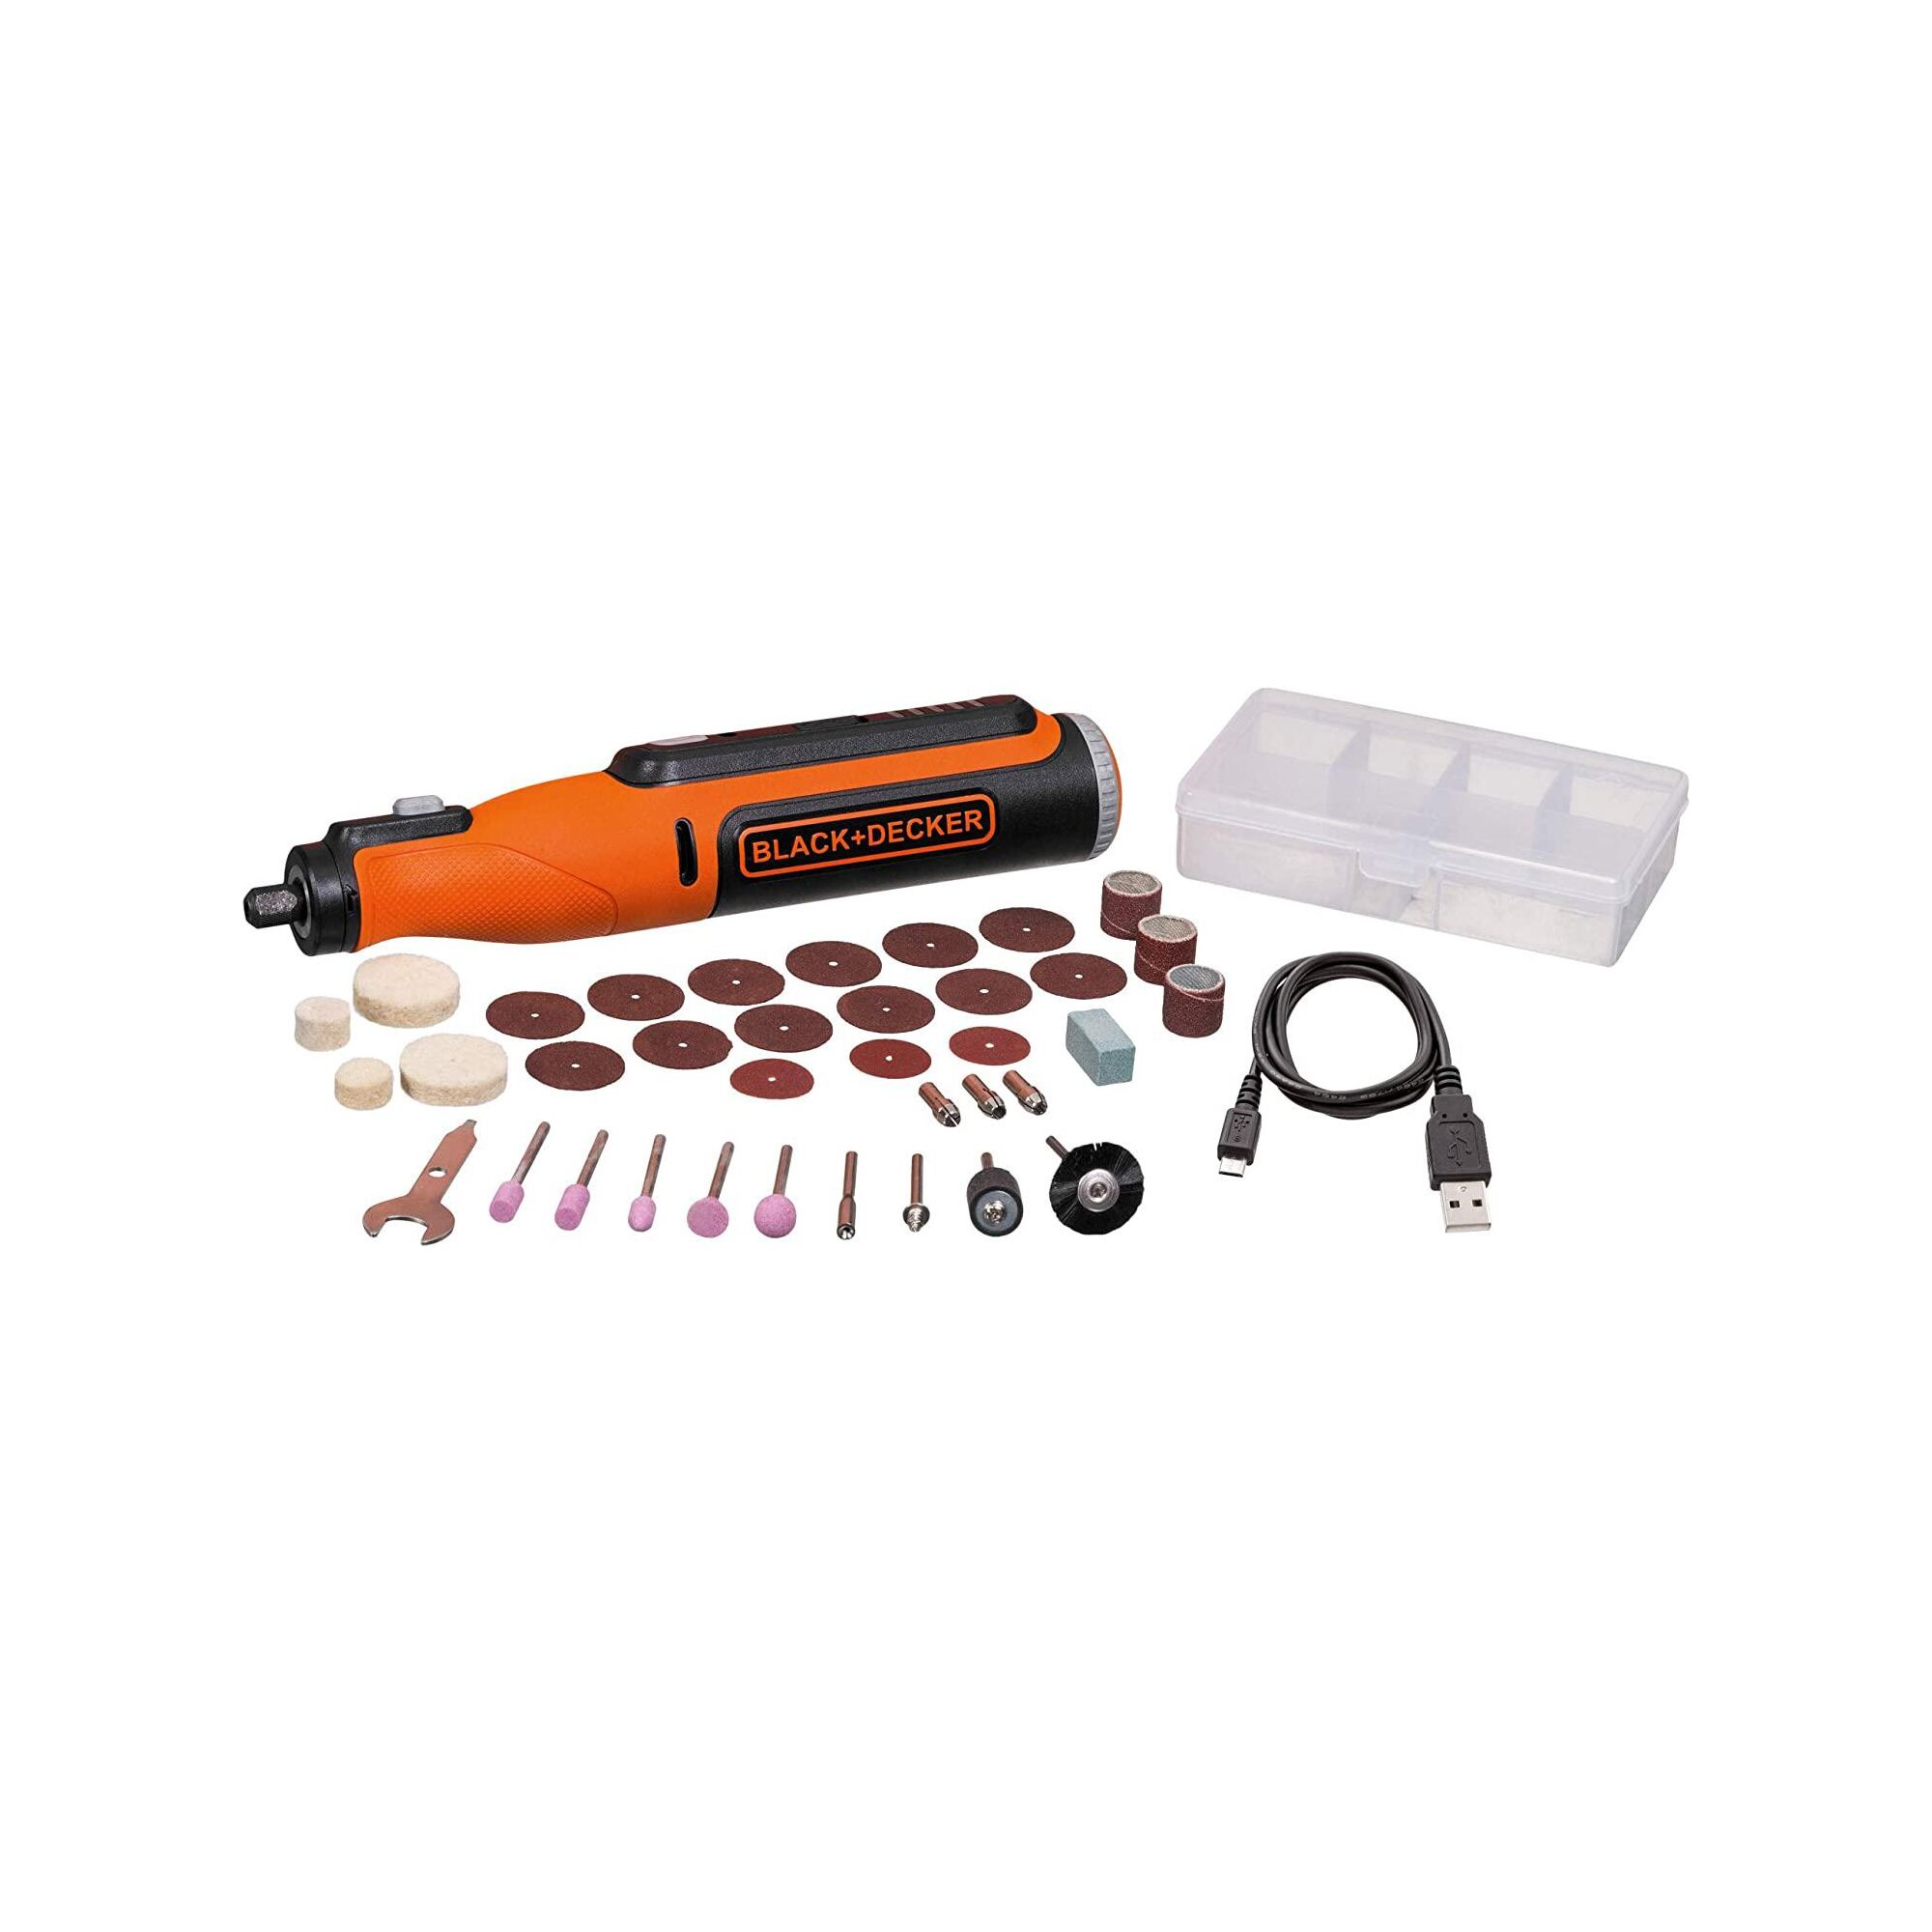 8 volt rotary tool kit including USB charging cable and precision sanding and polishing elements